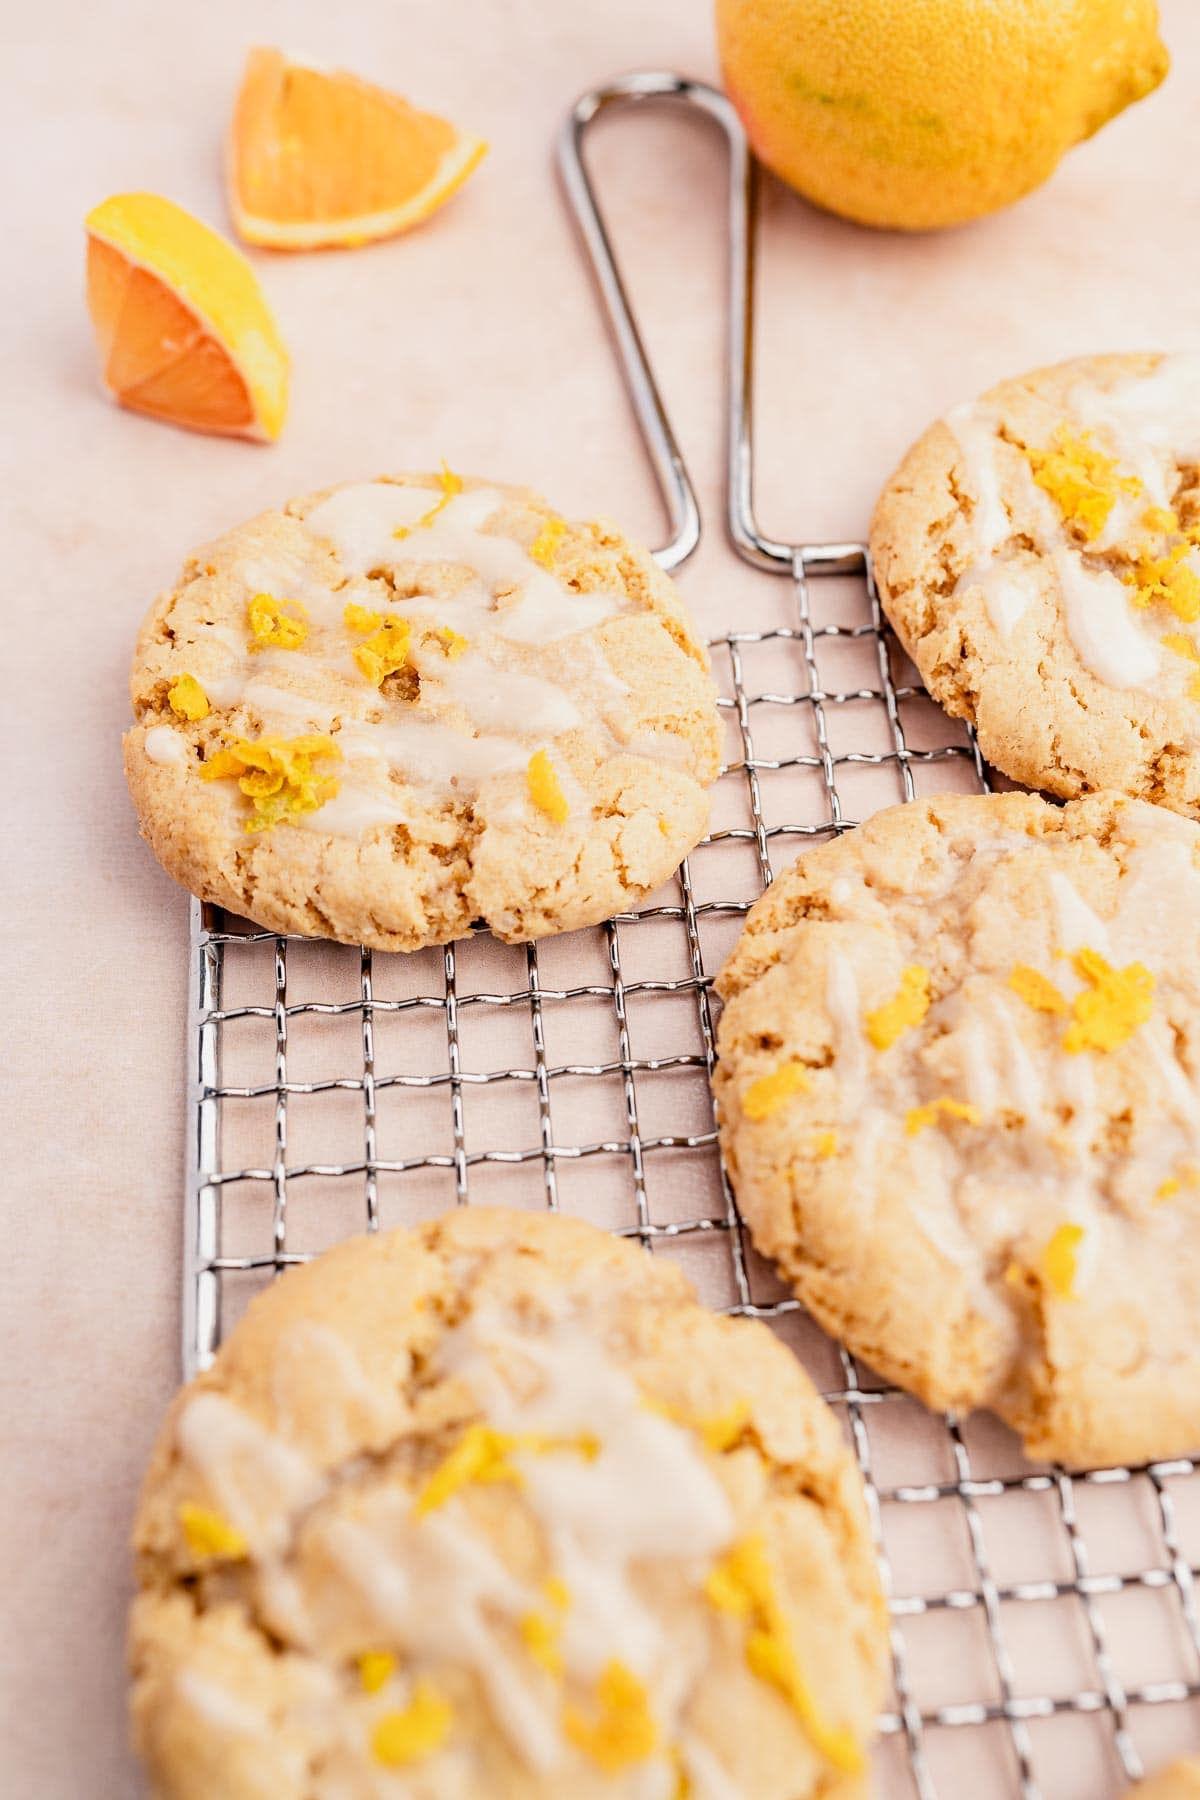 Gluten-free lemon cookies on a cooling rack with orange slices.